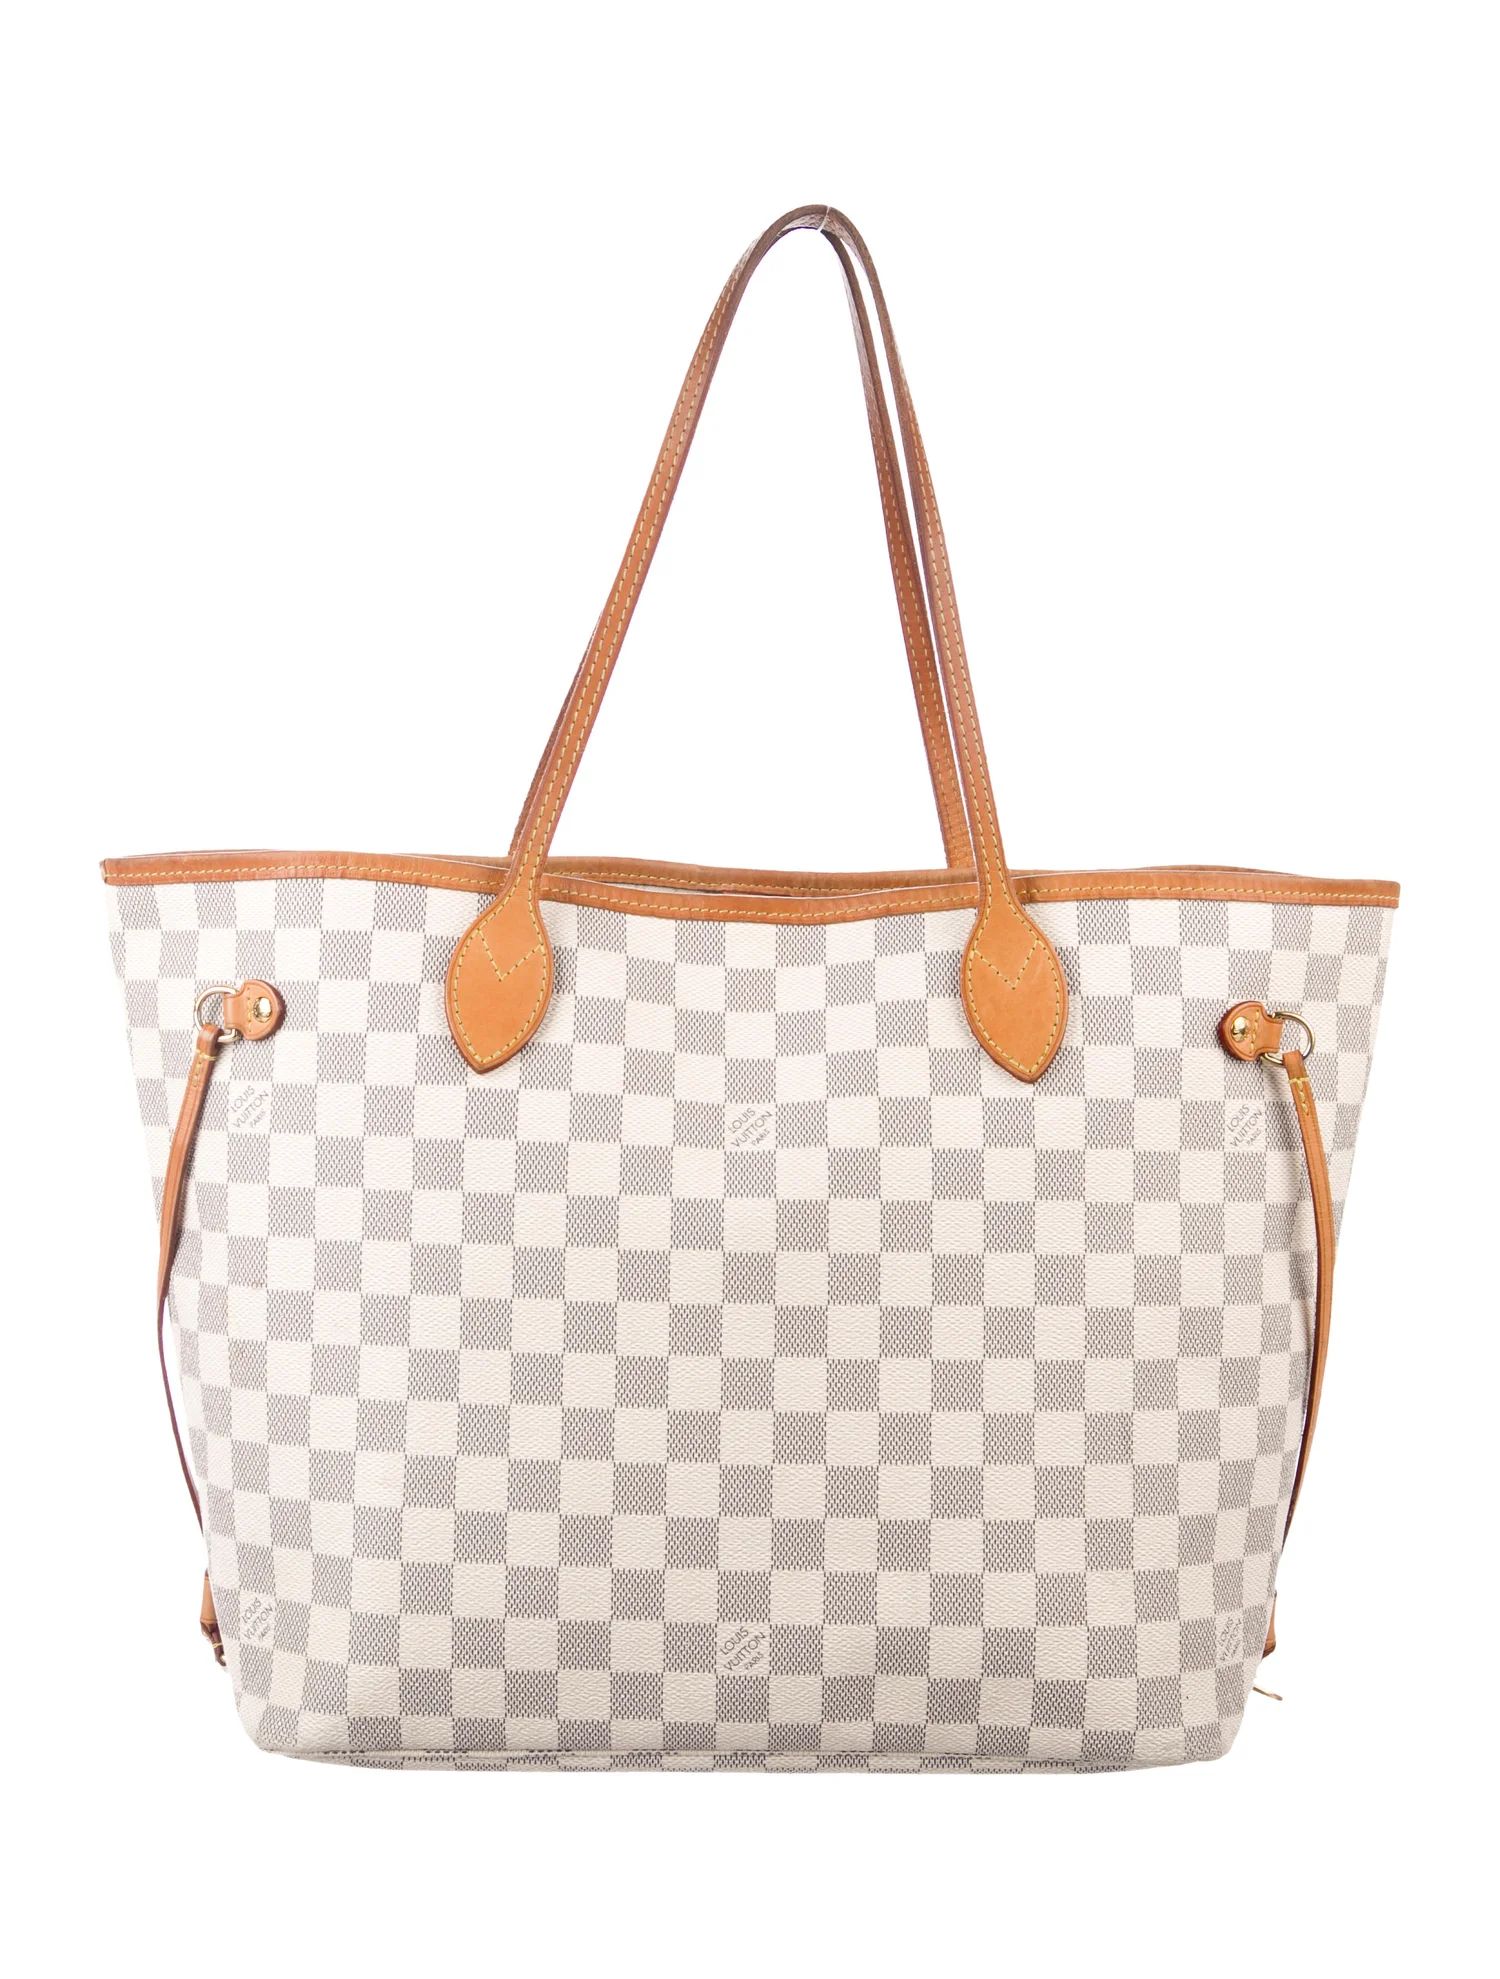 Louis Vuitton Damier Azur Neverfull MM w/ Pouch - Handbags -
          LOU261013 | The RealReal | The RealReal